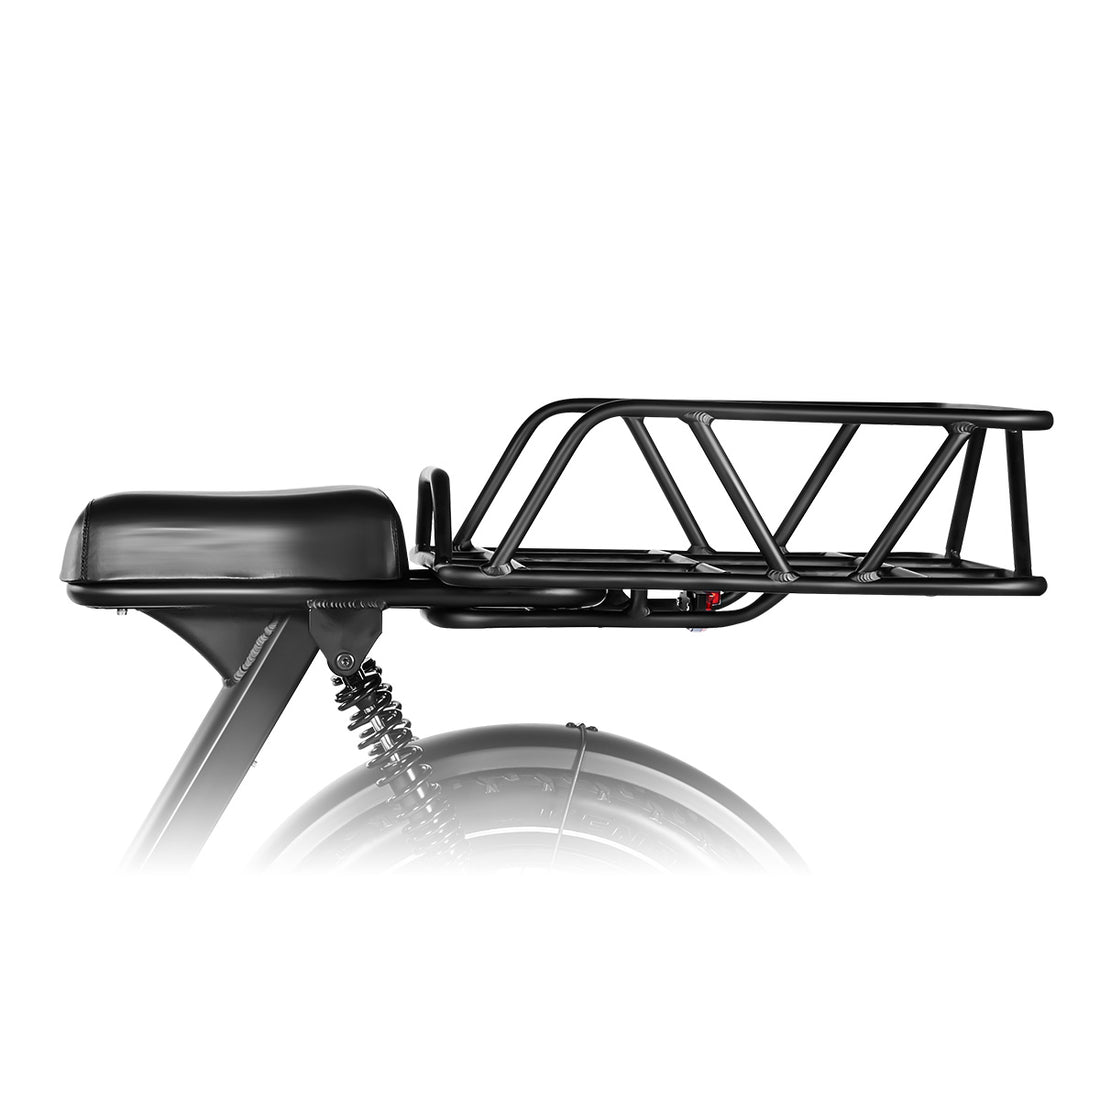 himiway bike cargo rack for food delivery